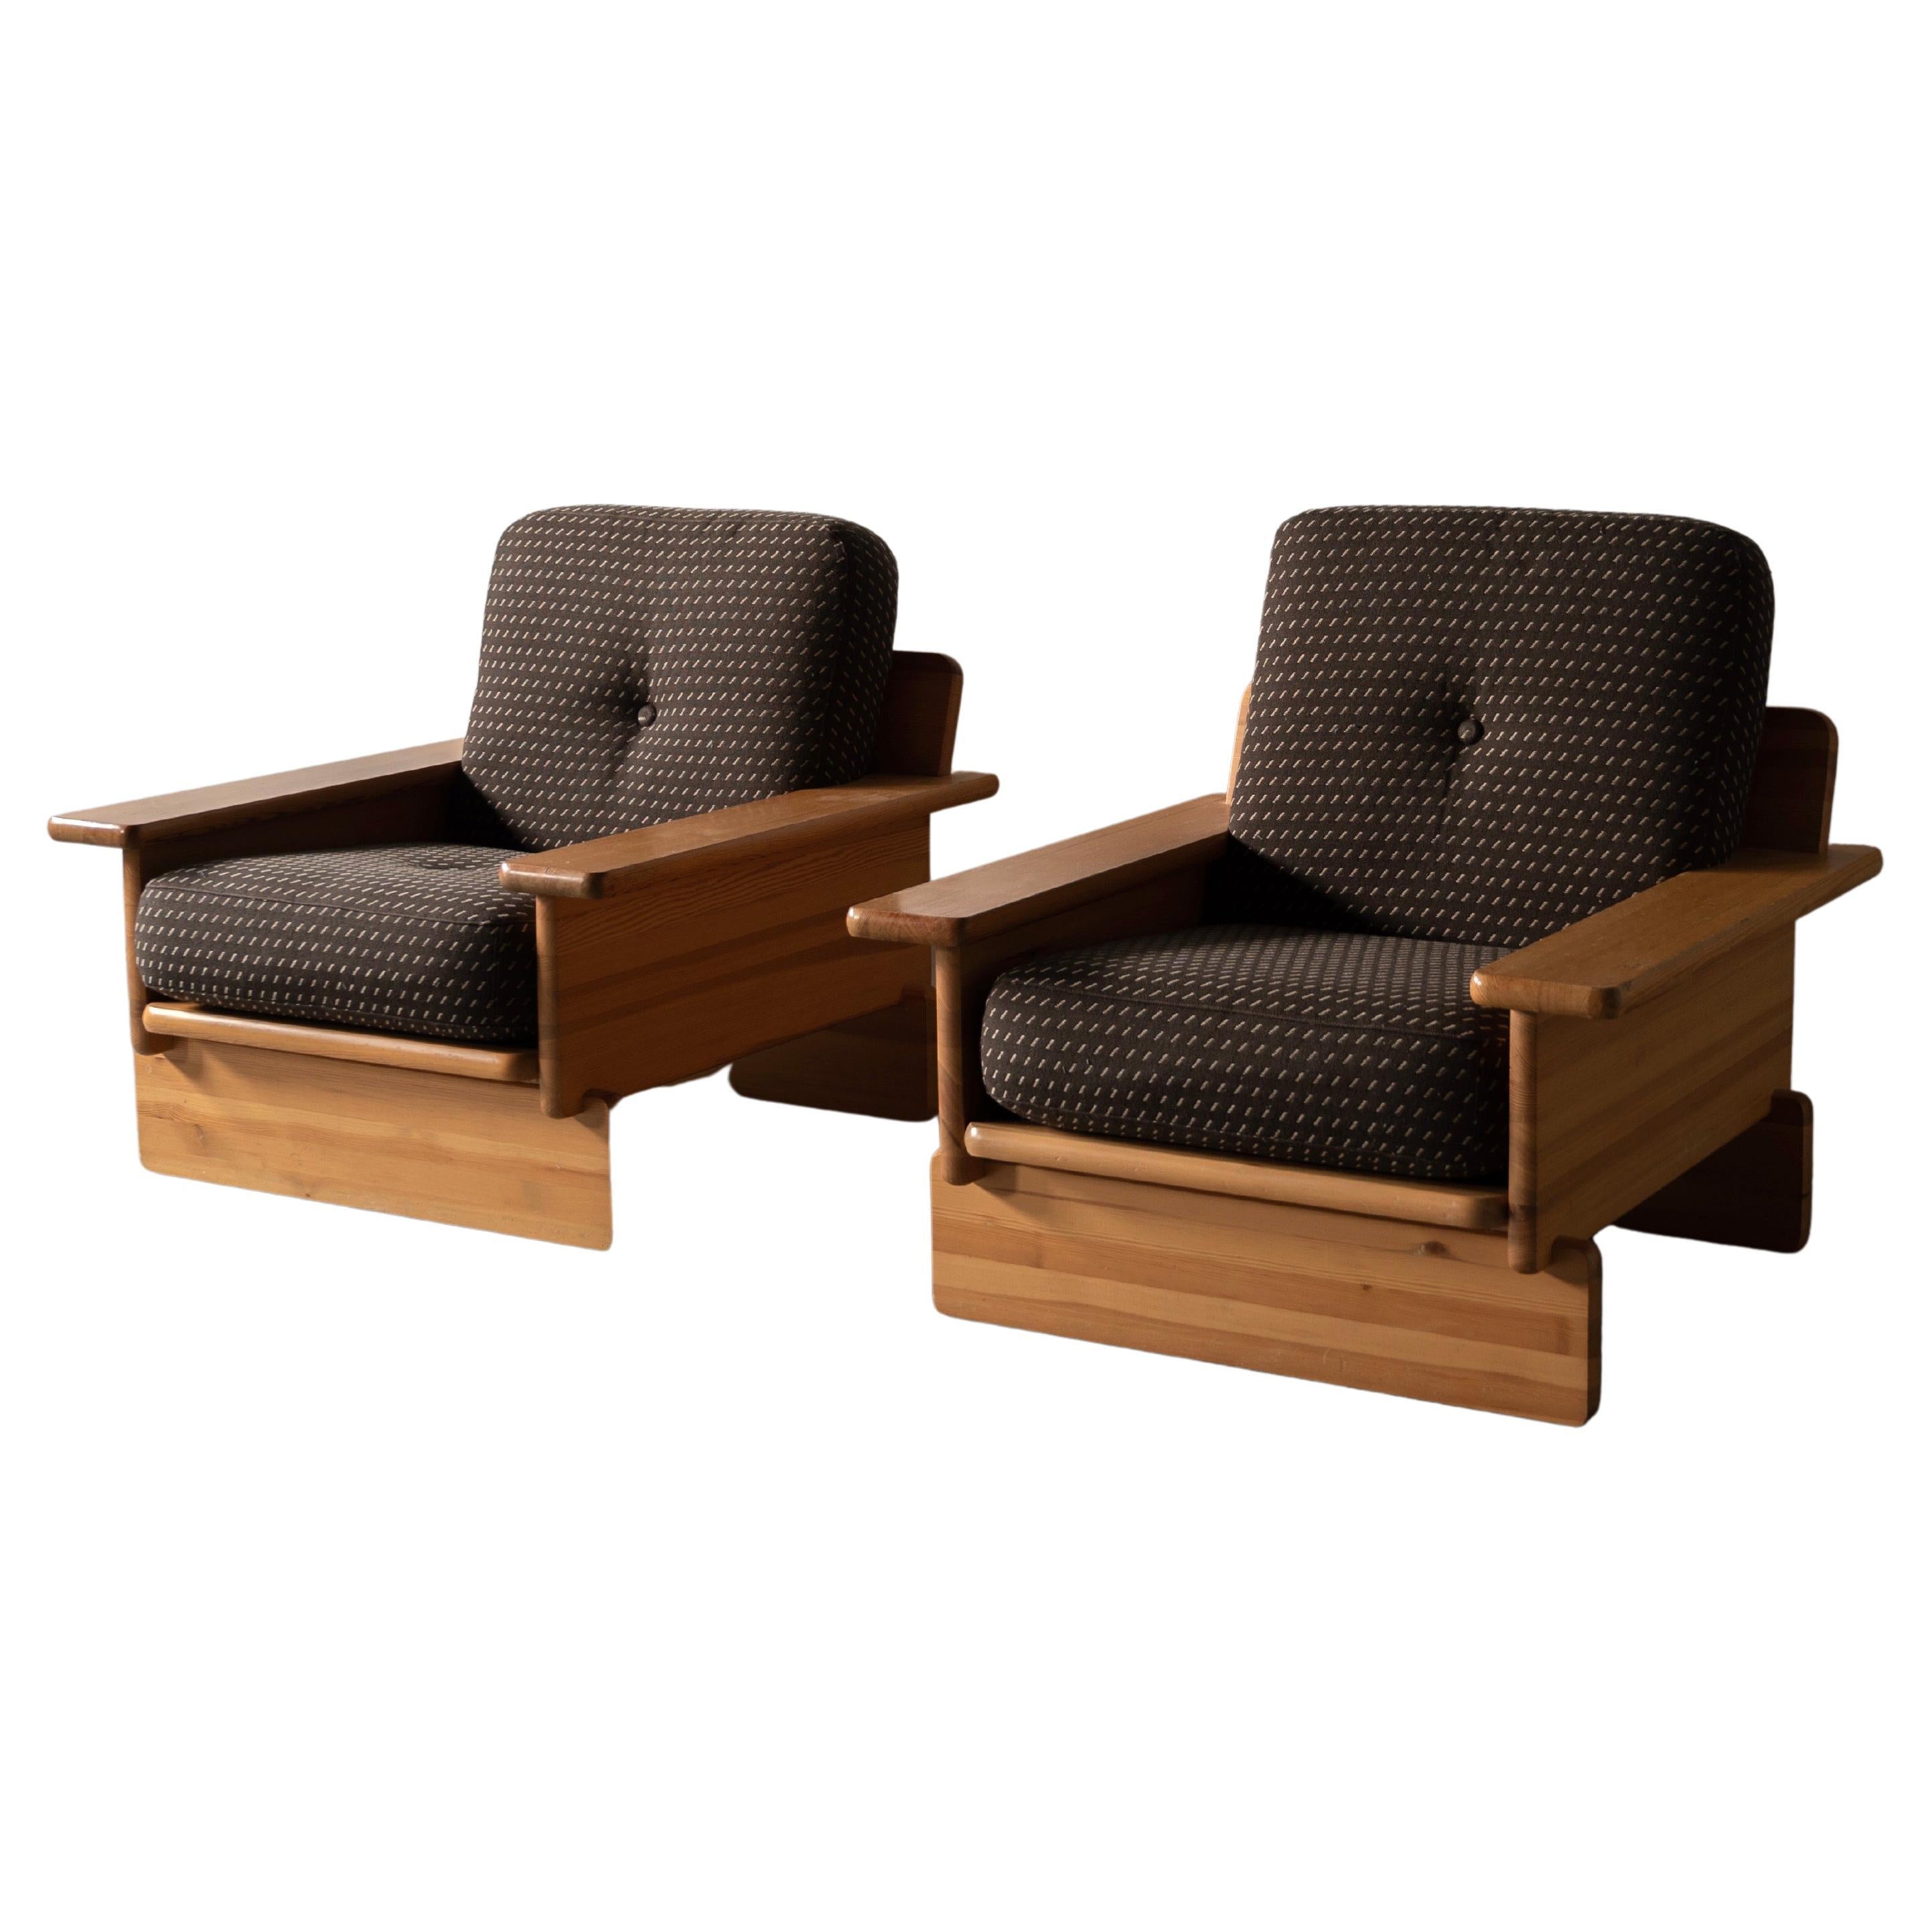 Swedish Cabinetmaker, Lounge Chairs, Solid Pine, Brown Fabric, Finland, c. 1970s